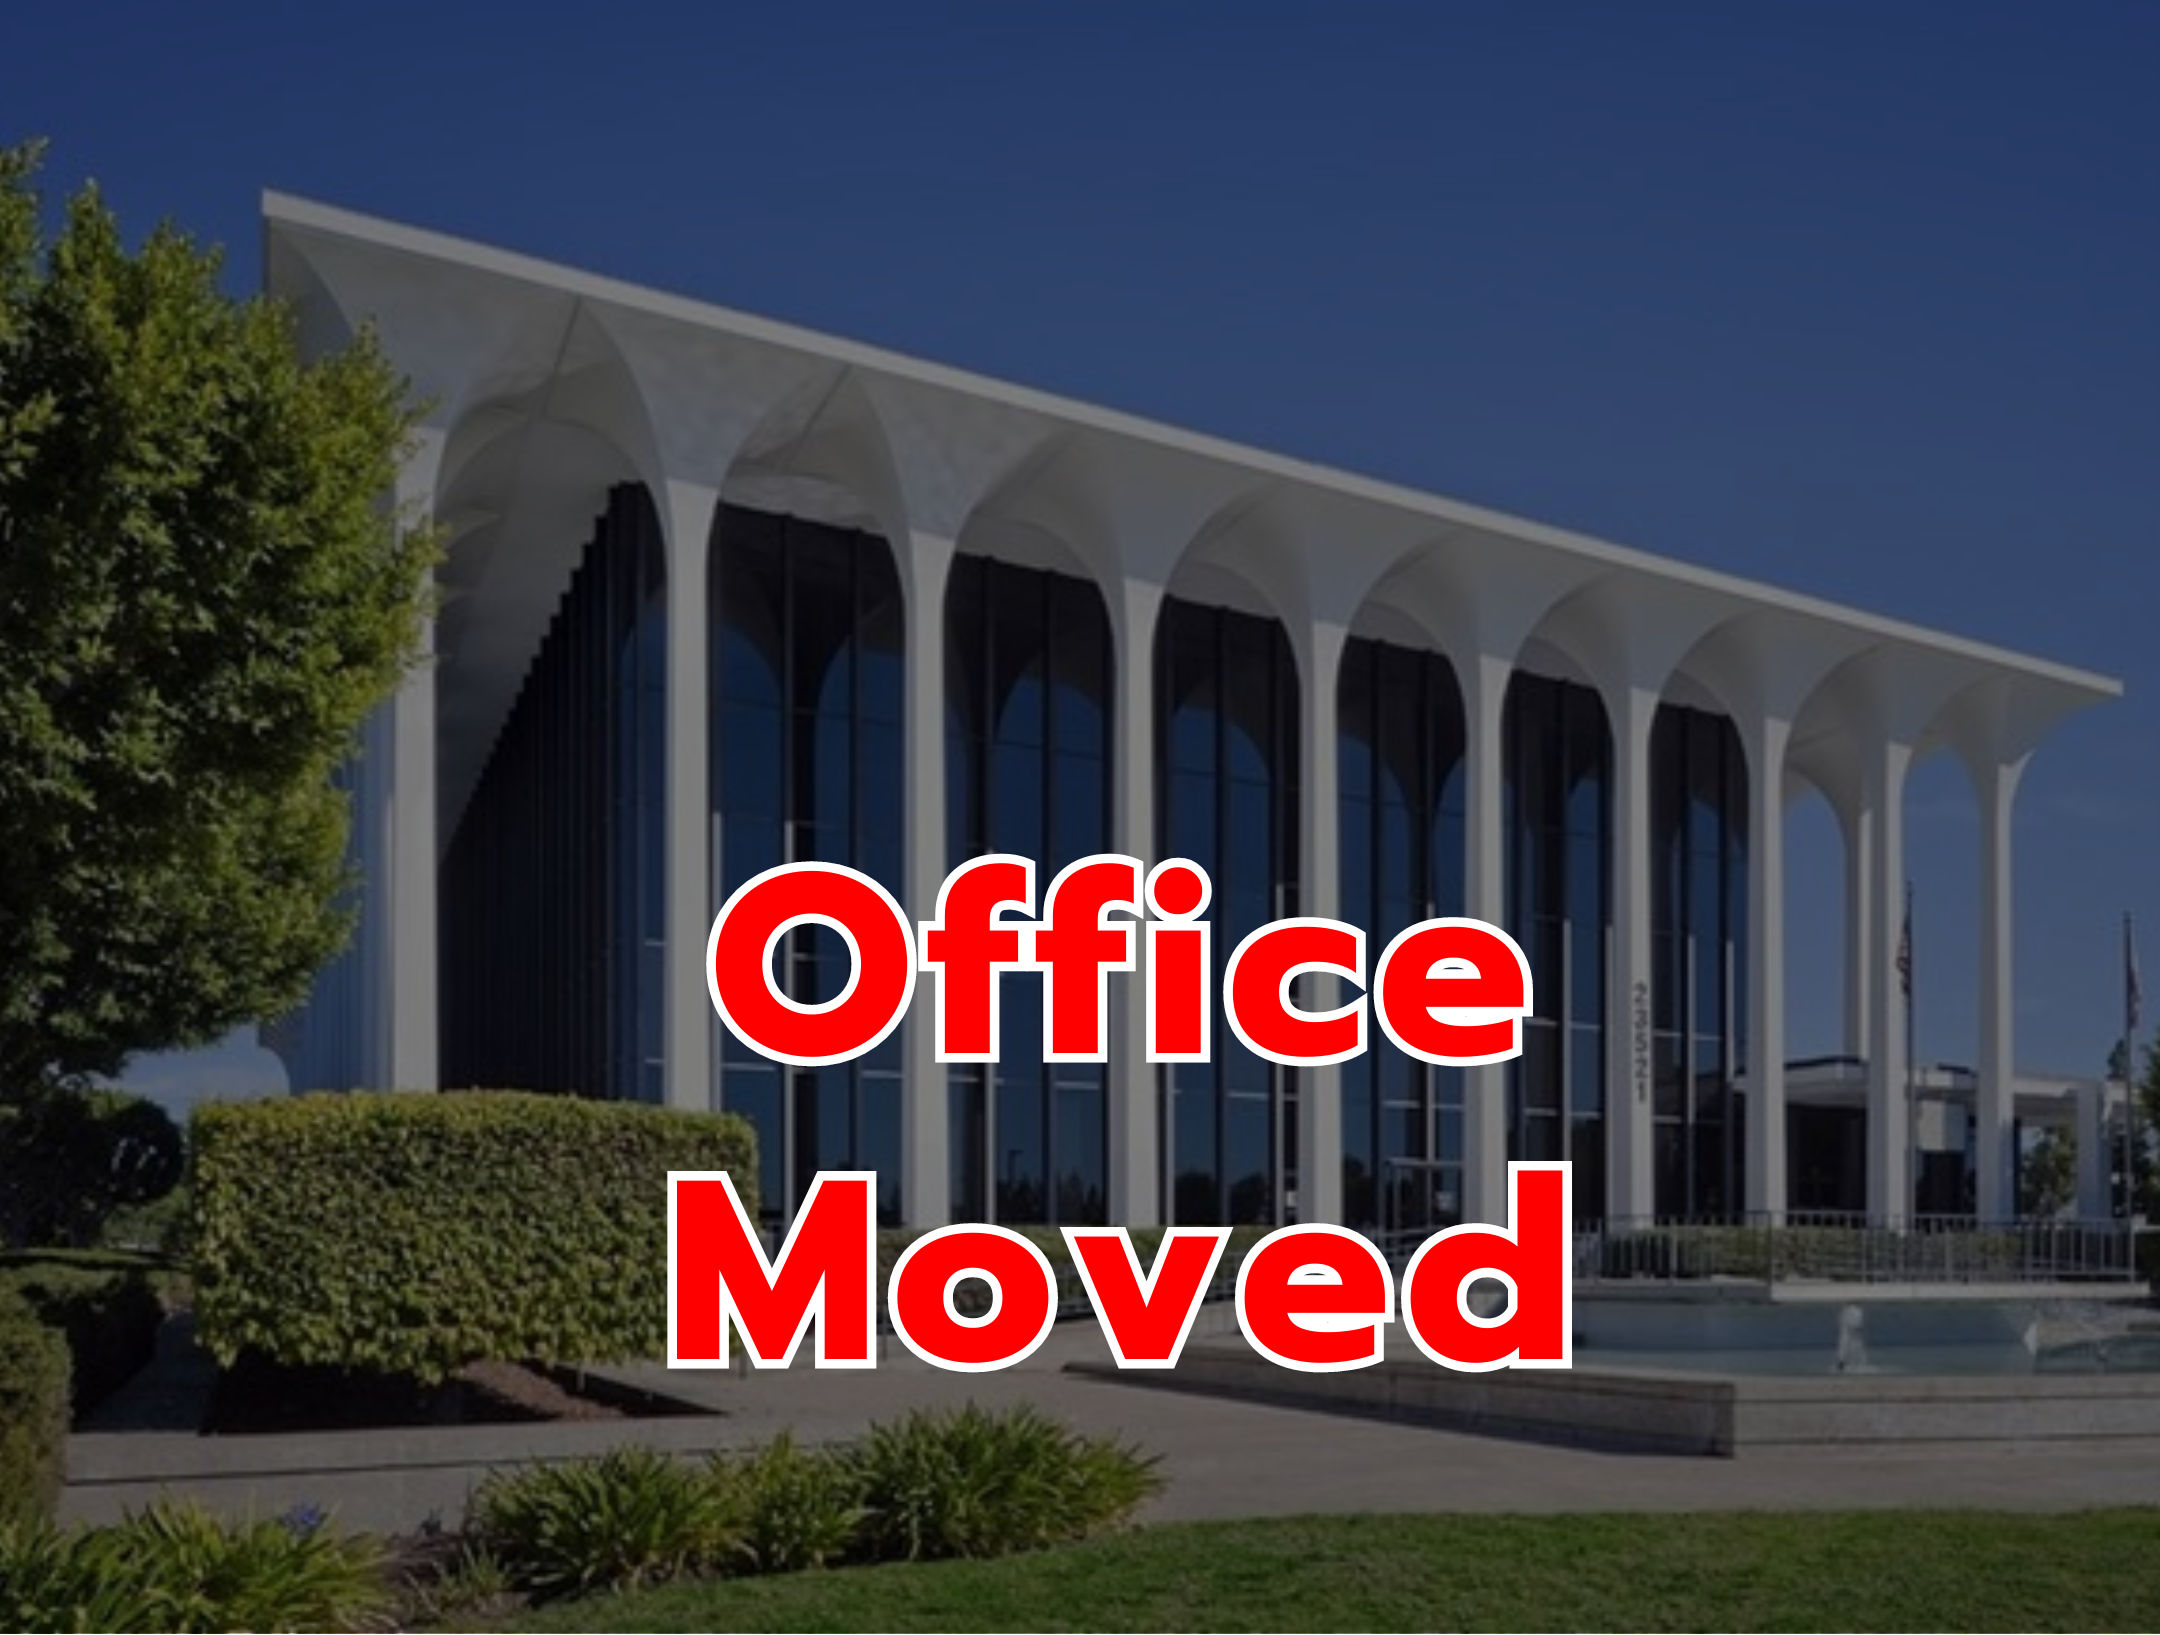 Laguna Hills Office has moved